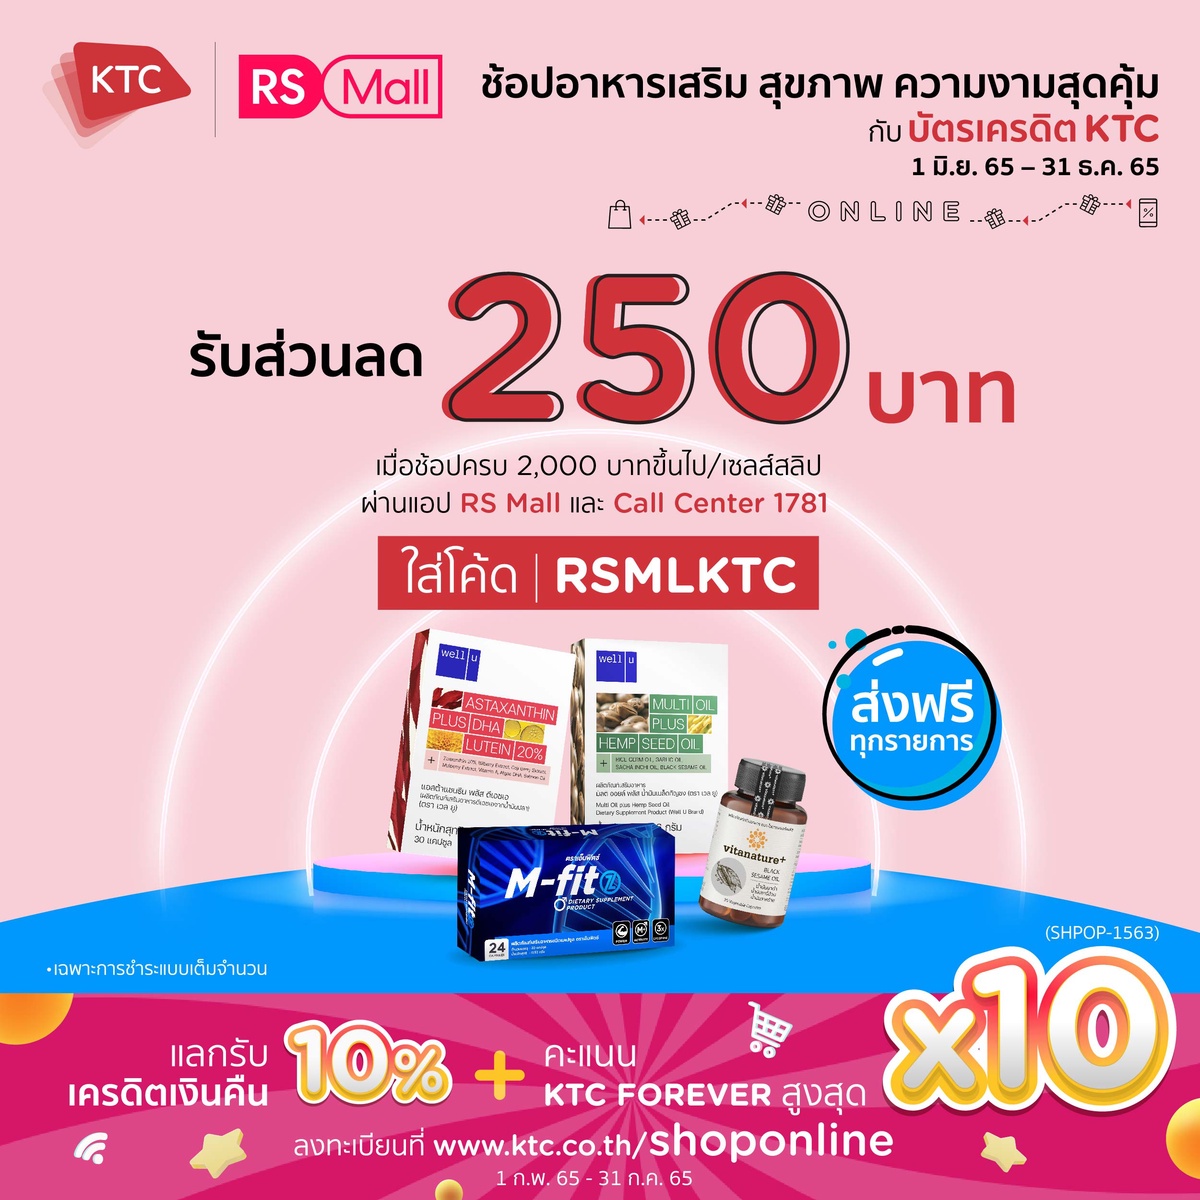 KTC partners with RS Mall in offering 250 baht discounts.